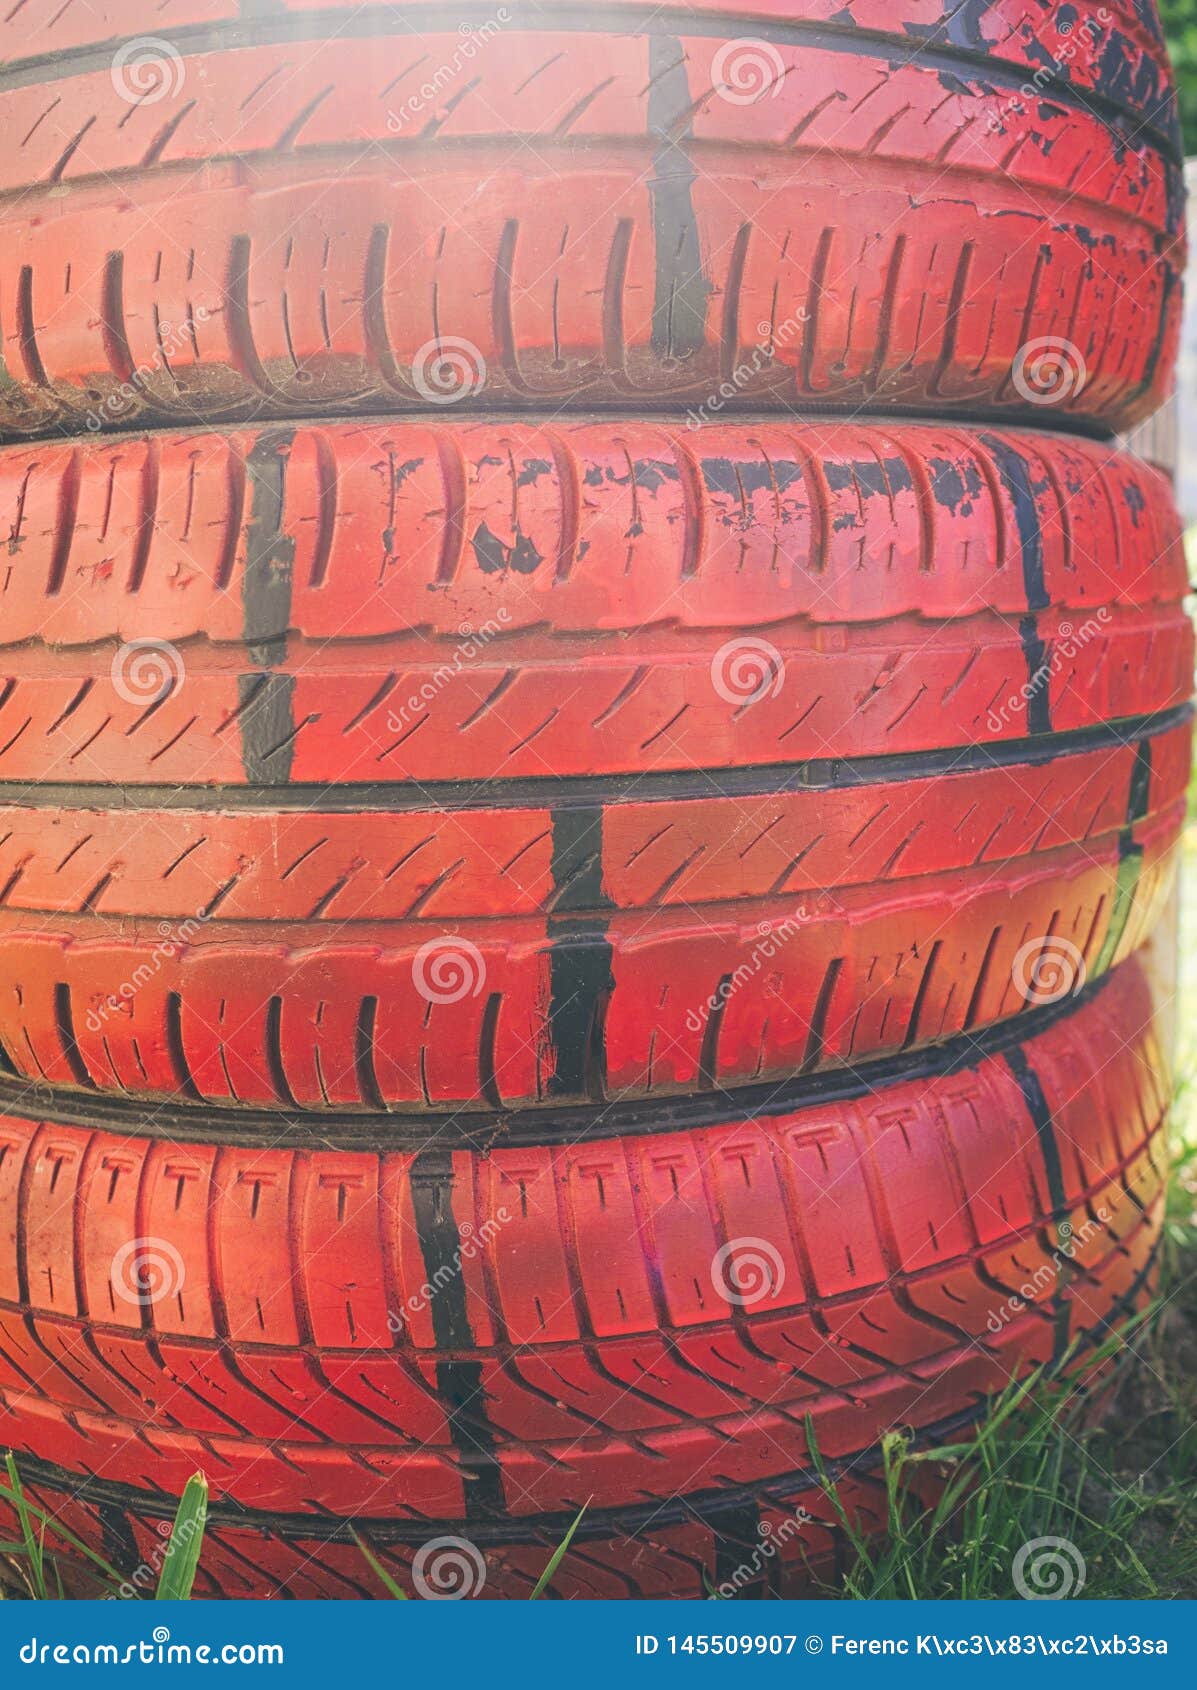 Painted Tires In The Garden Stock Image Image Of Home Natural